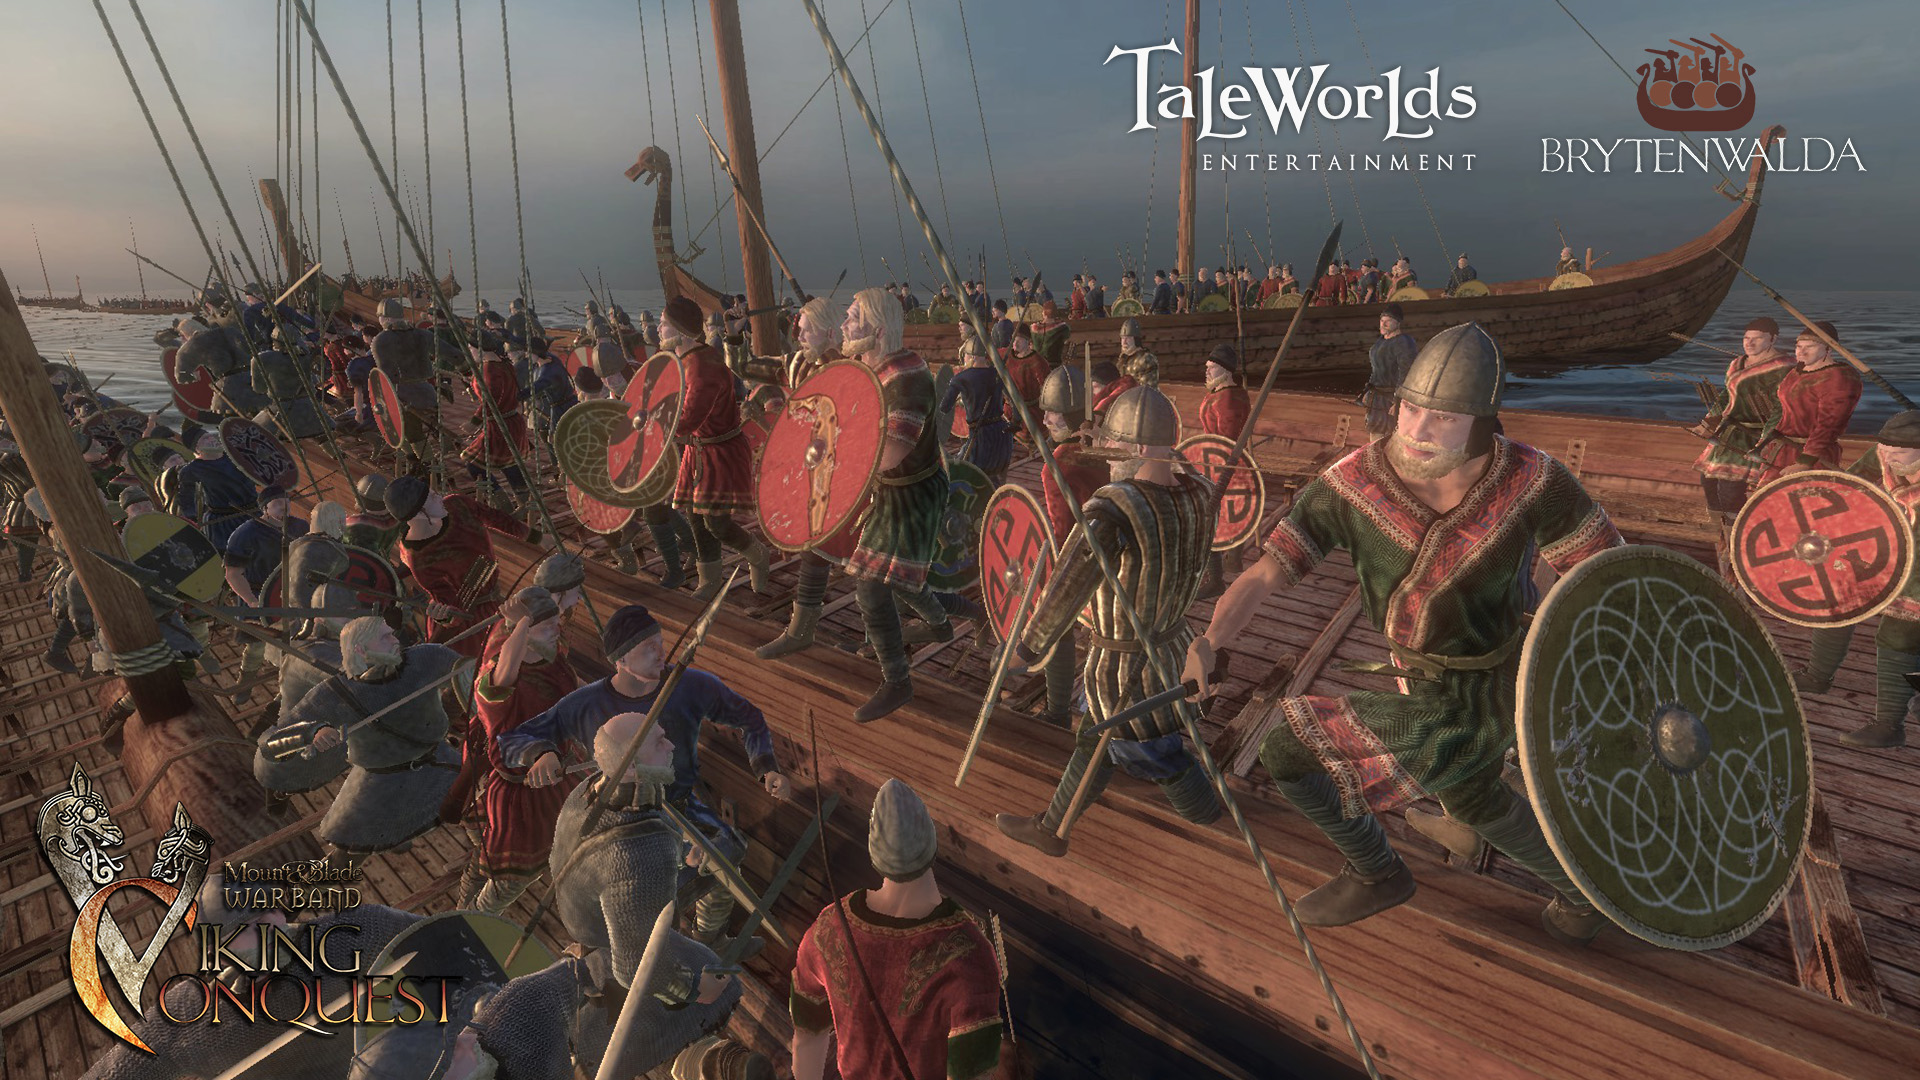 Mount & Blade: Viking Conquest Review - Time to Pillage